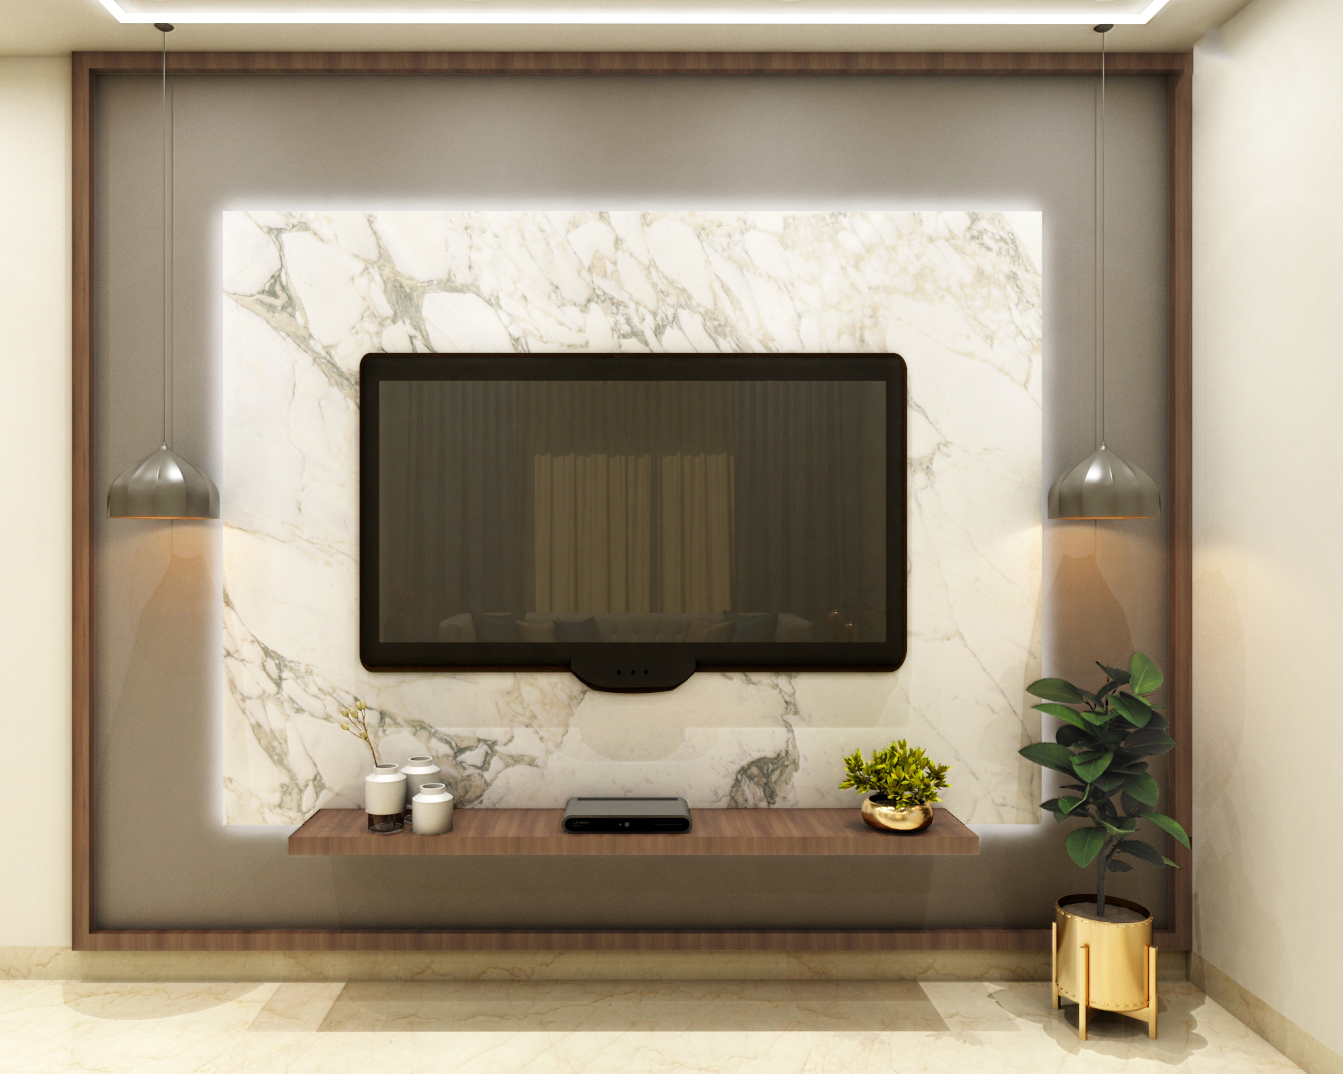 Contemporary TV Unit Design With Marble and Grey Tiles